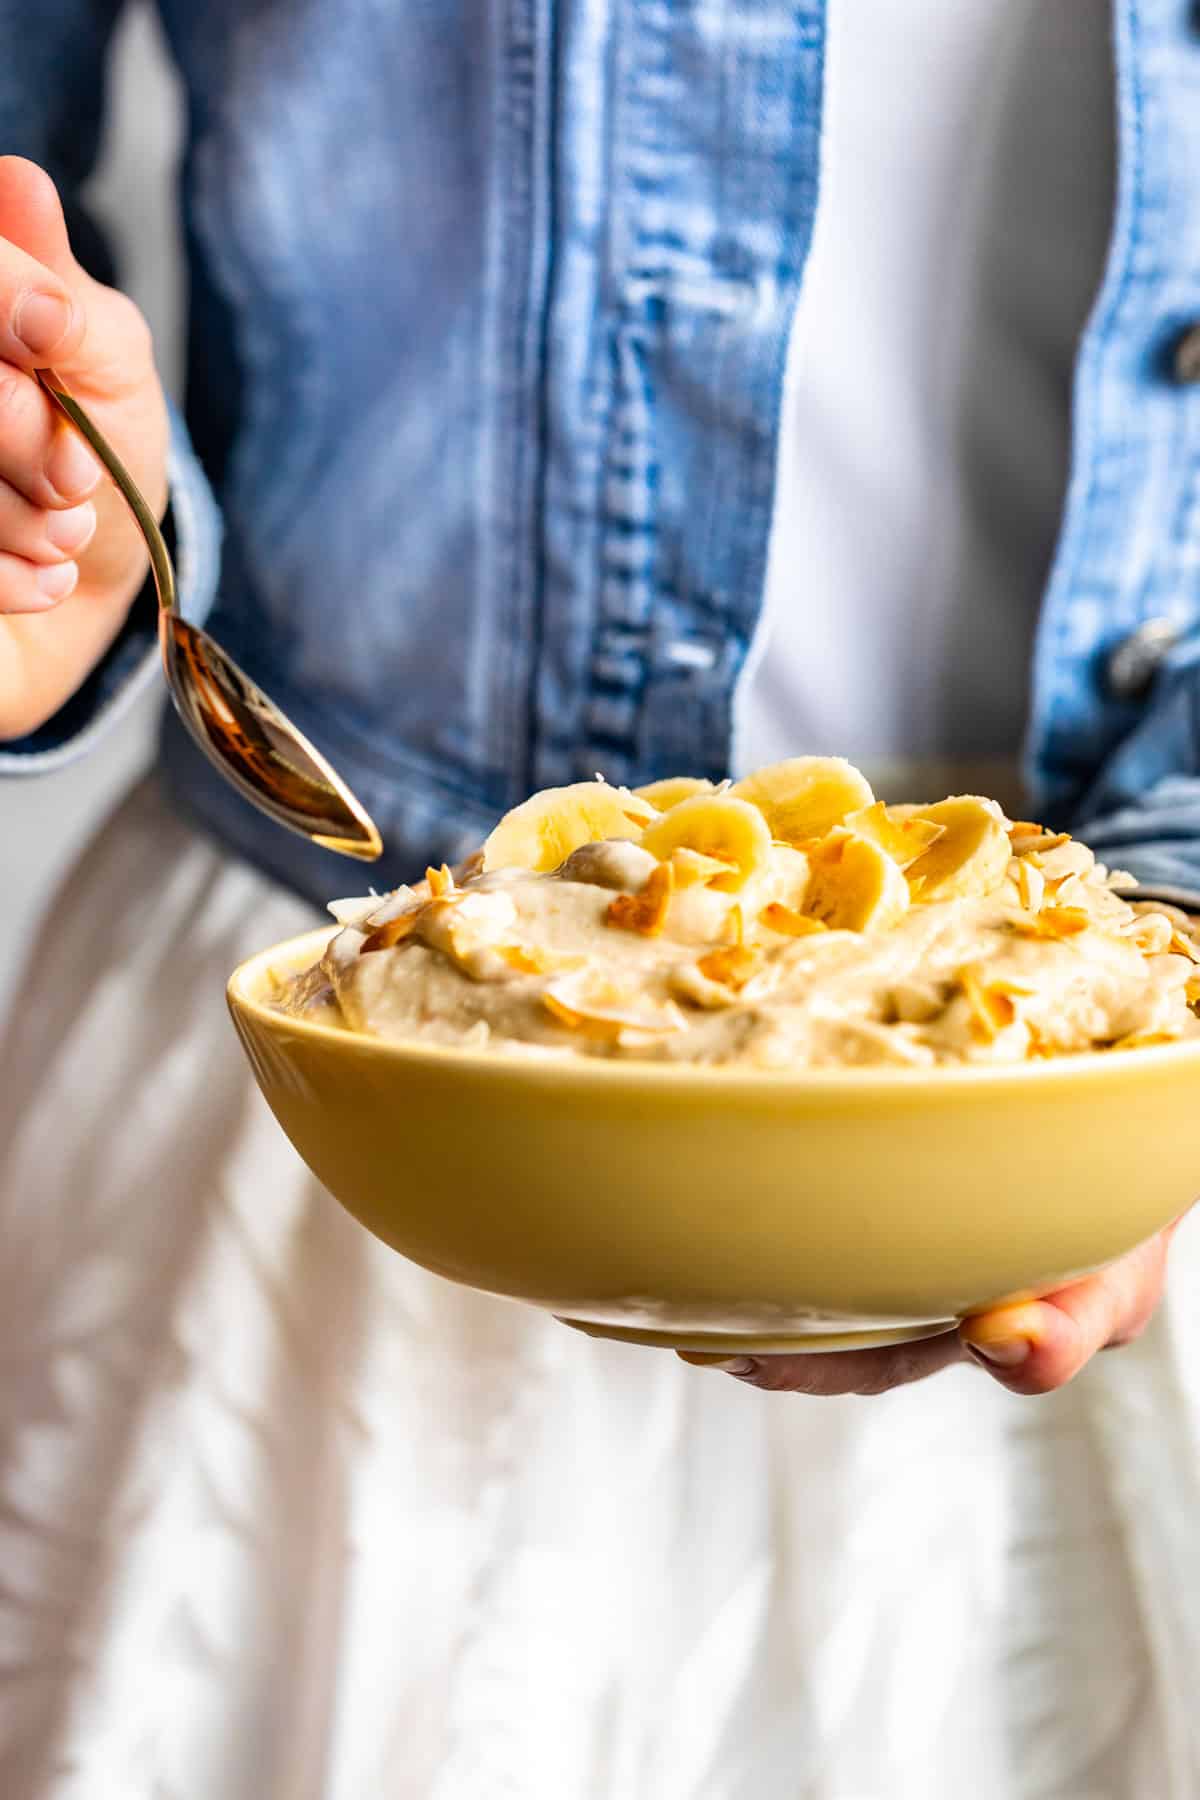 A yellow bowl filled with Creamy Coconut Banana Nice Cream with a person in a blue jacket holding the bowl.